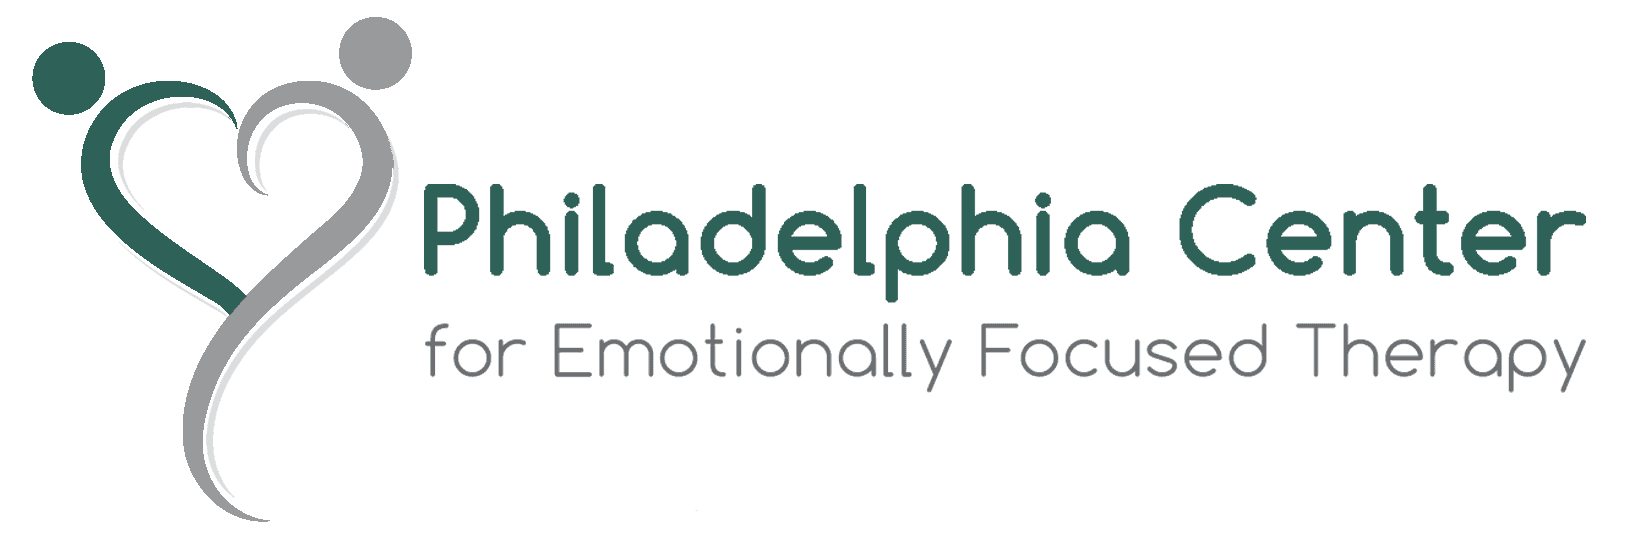 Philadelphia Center for Emotionally Focused Therapy